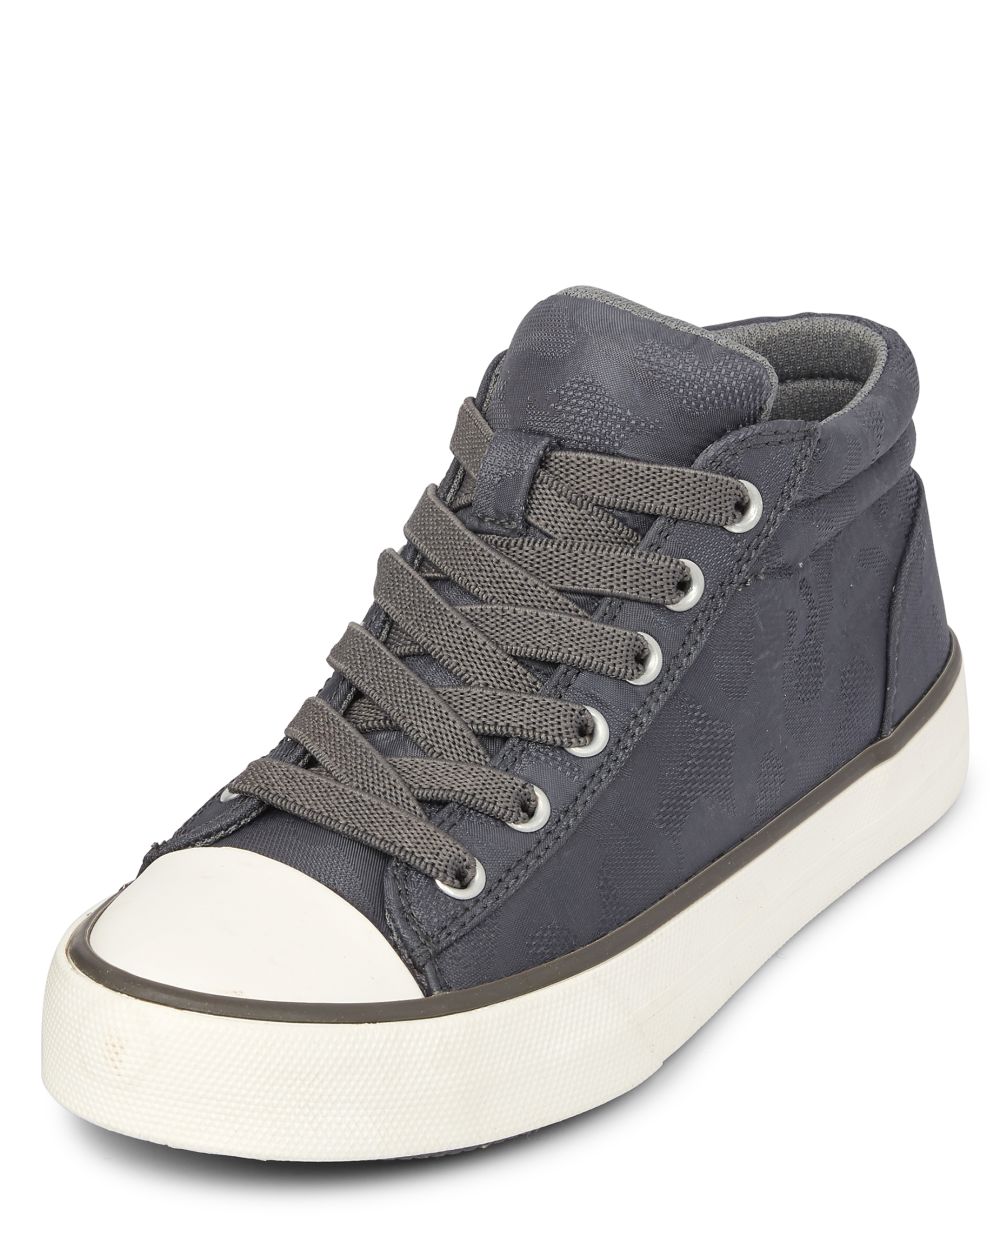 

s Boys Camo Mid Top Sneakers - Gray - The Children's Place